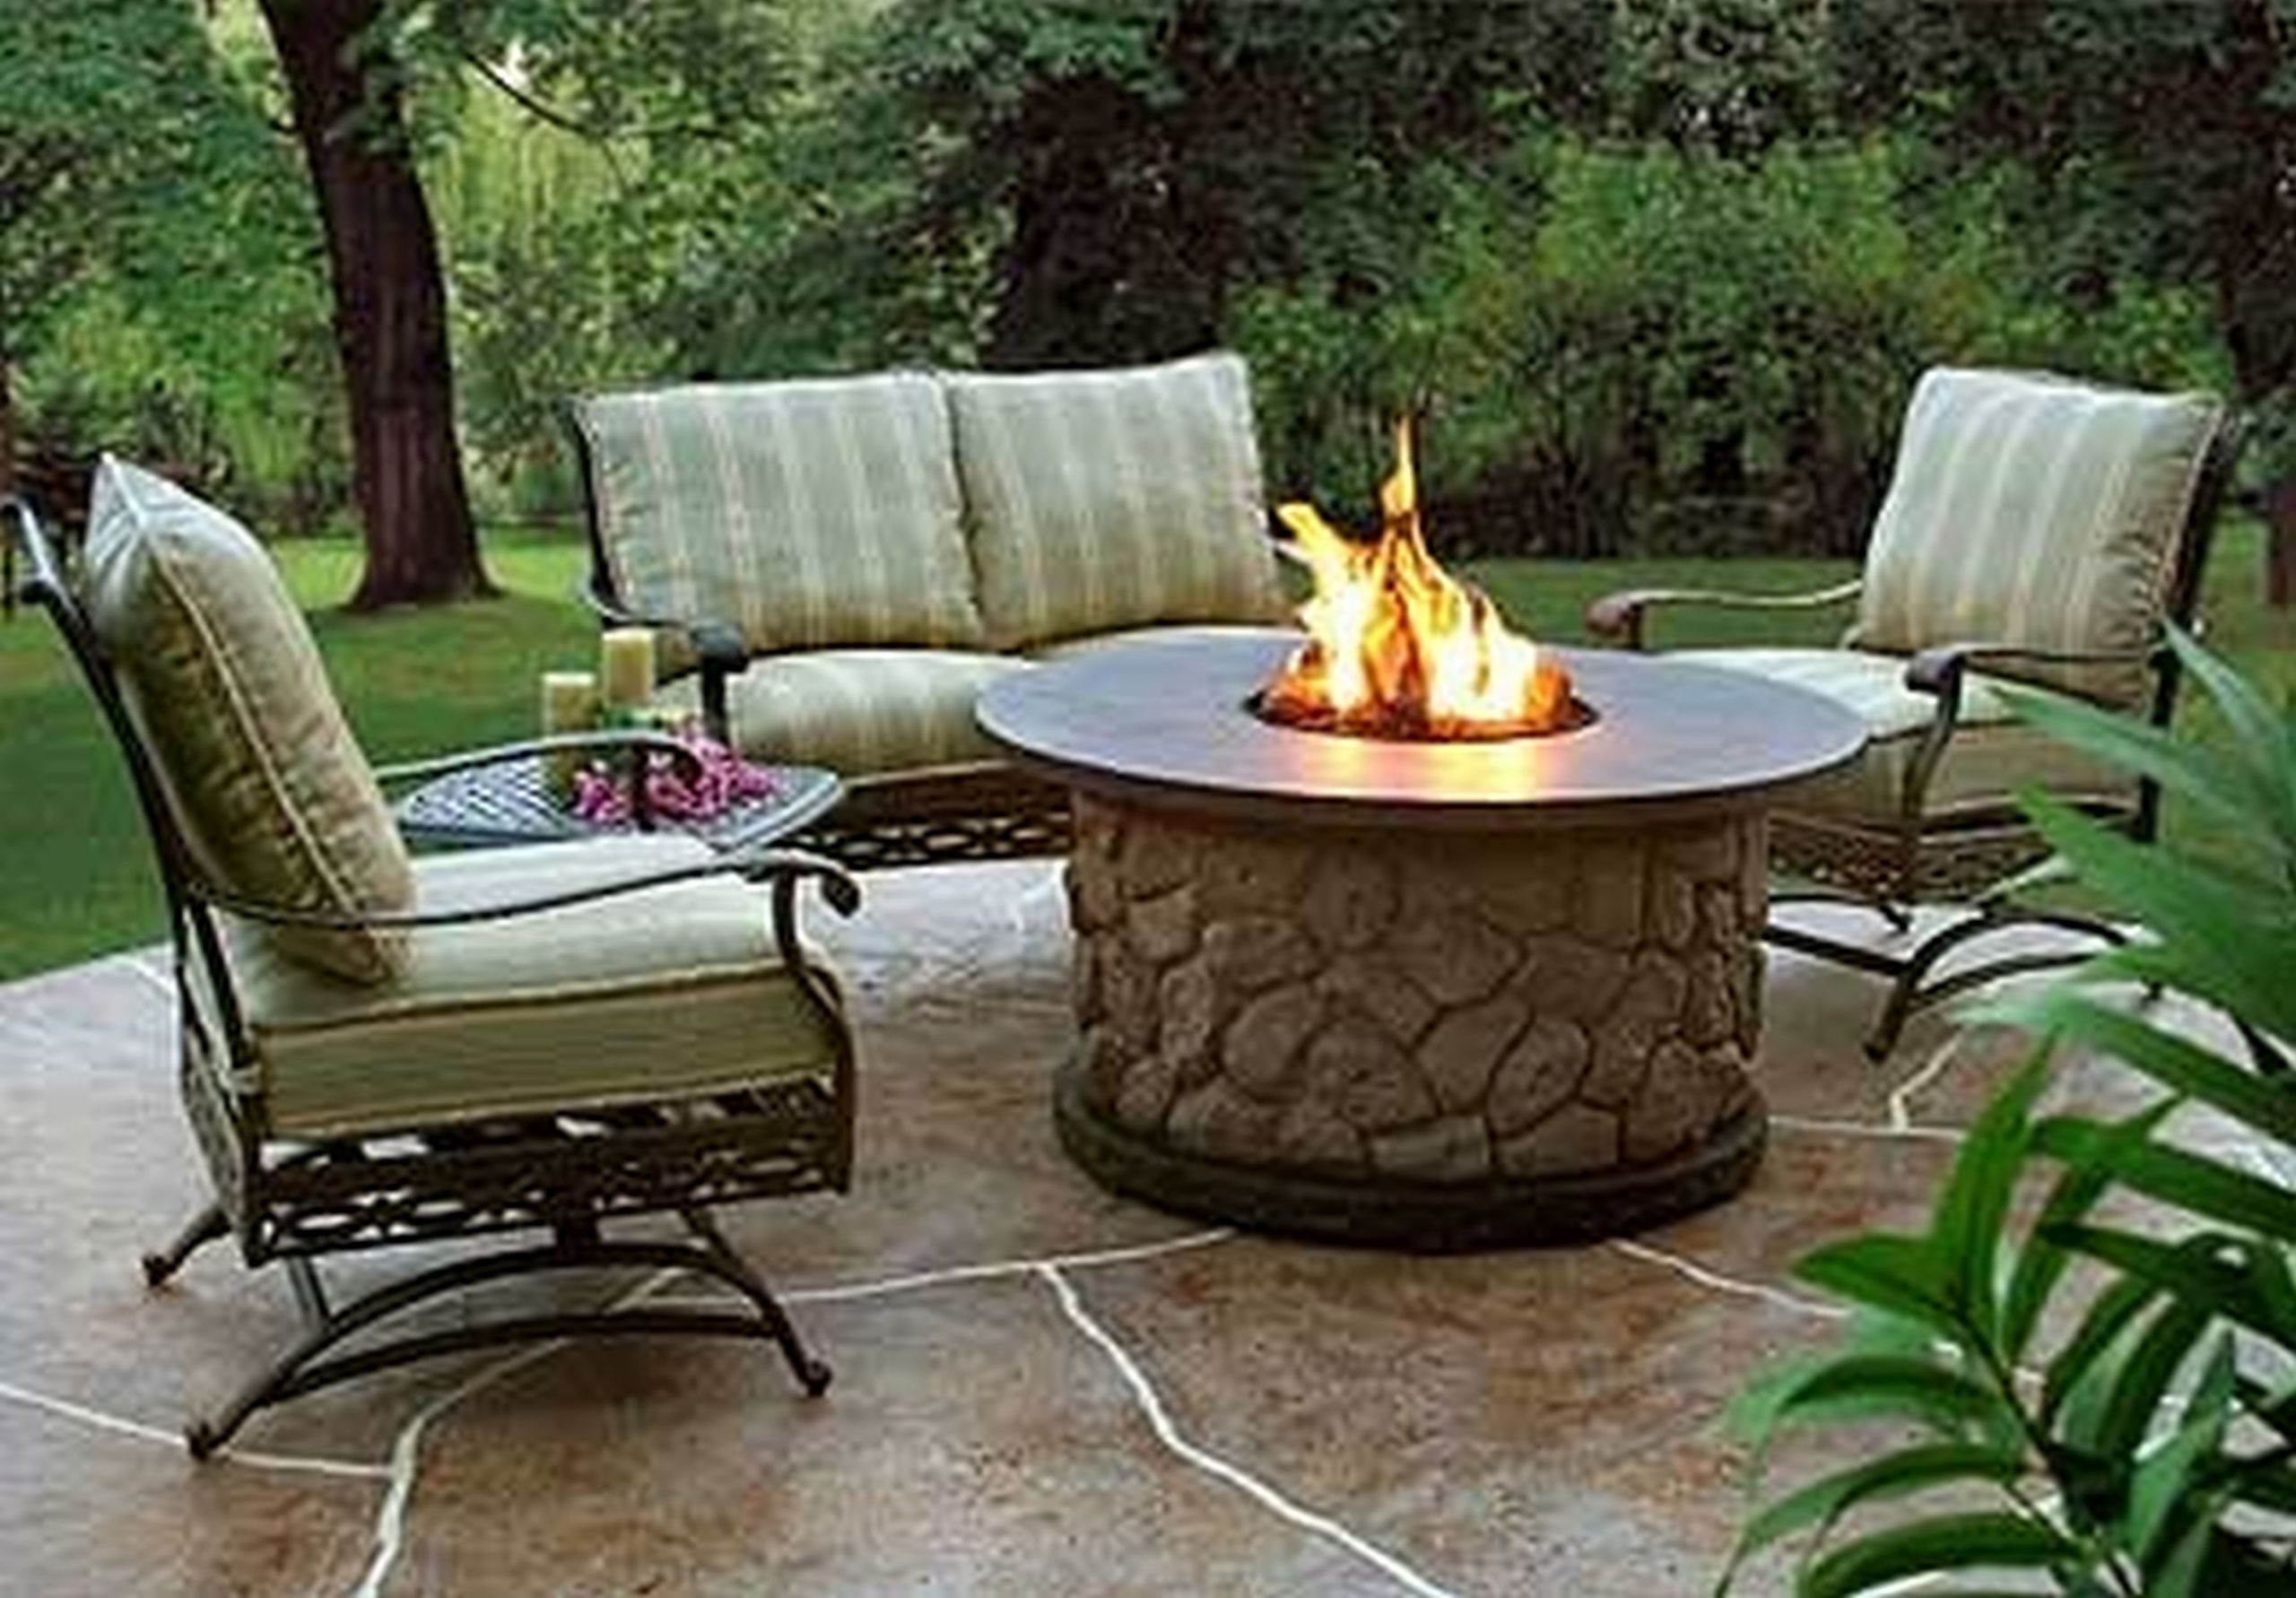 Outdoor Furniture With Fire Pit
 10 DIY Outdoor Fire Pit Bowl Ideas You Have to Try At All